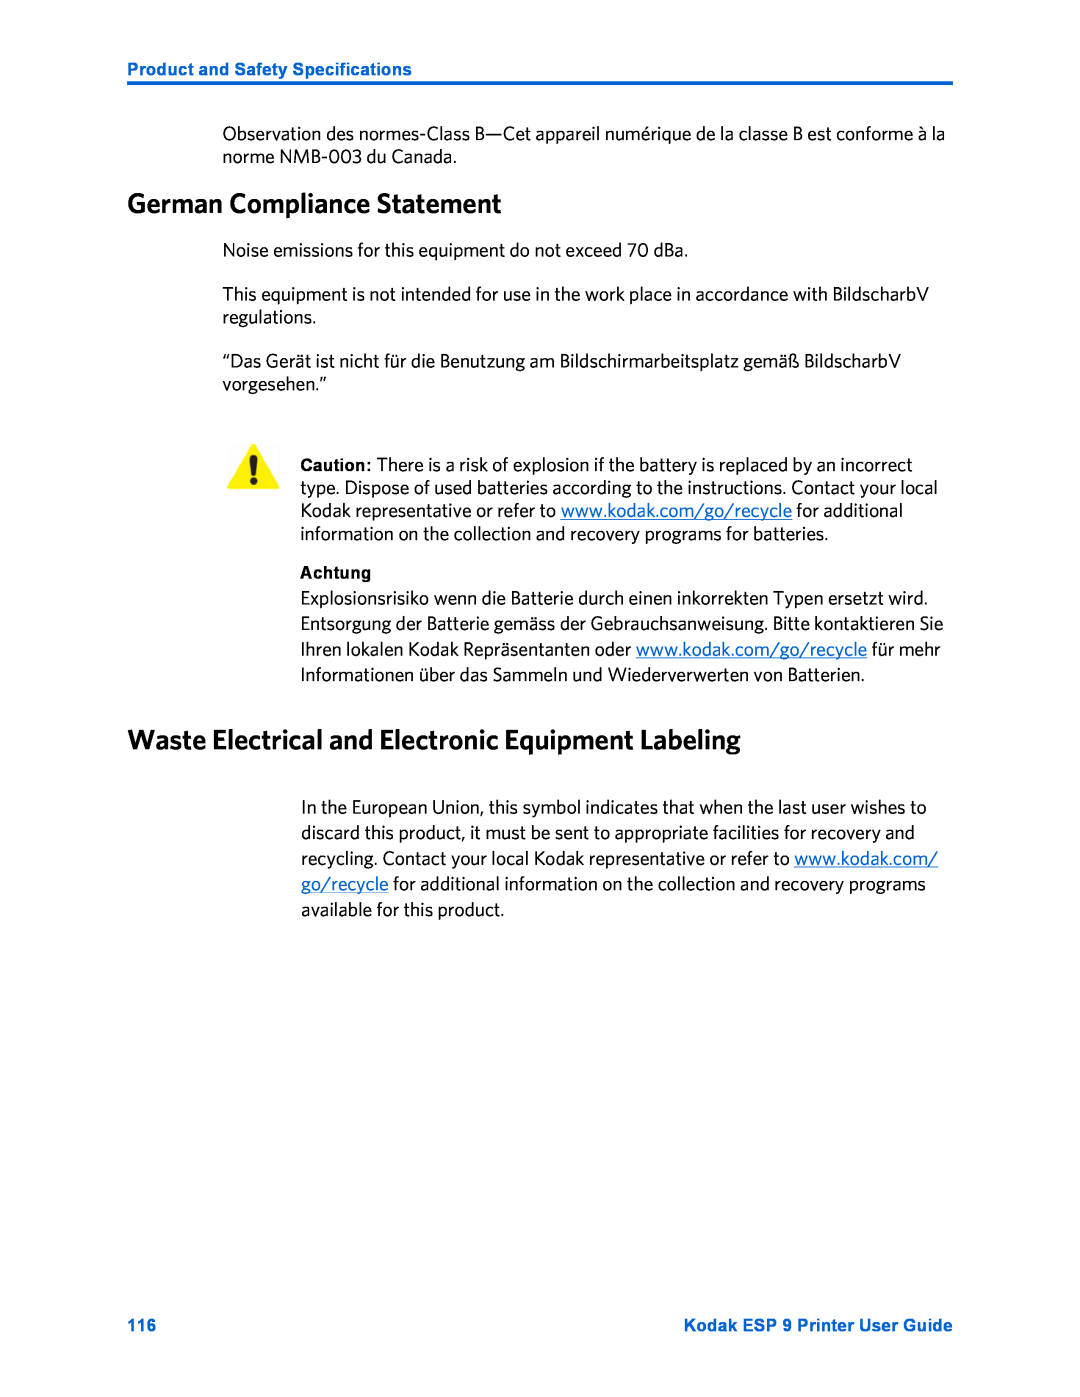 Kodak ESP 9 manual German Compliance Statement, Waste Electrical and Electronic Equipment Labeling 